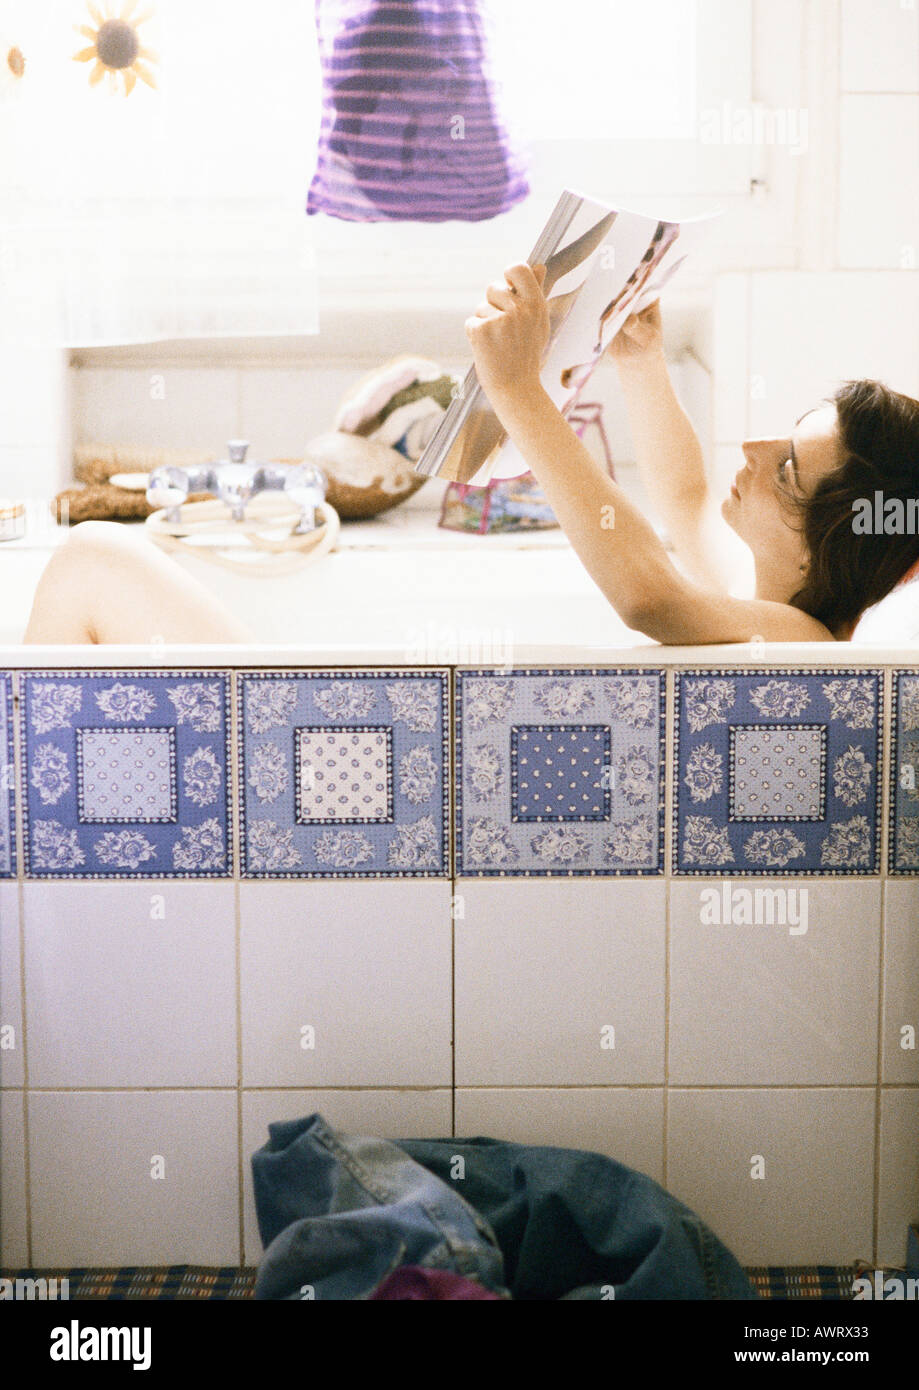 Woman reading in bathtub, side view Stock Photo